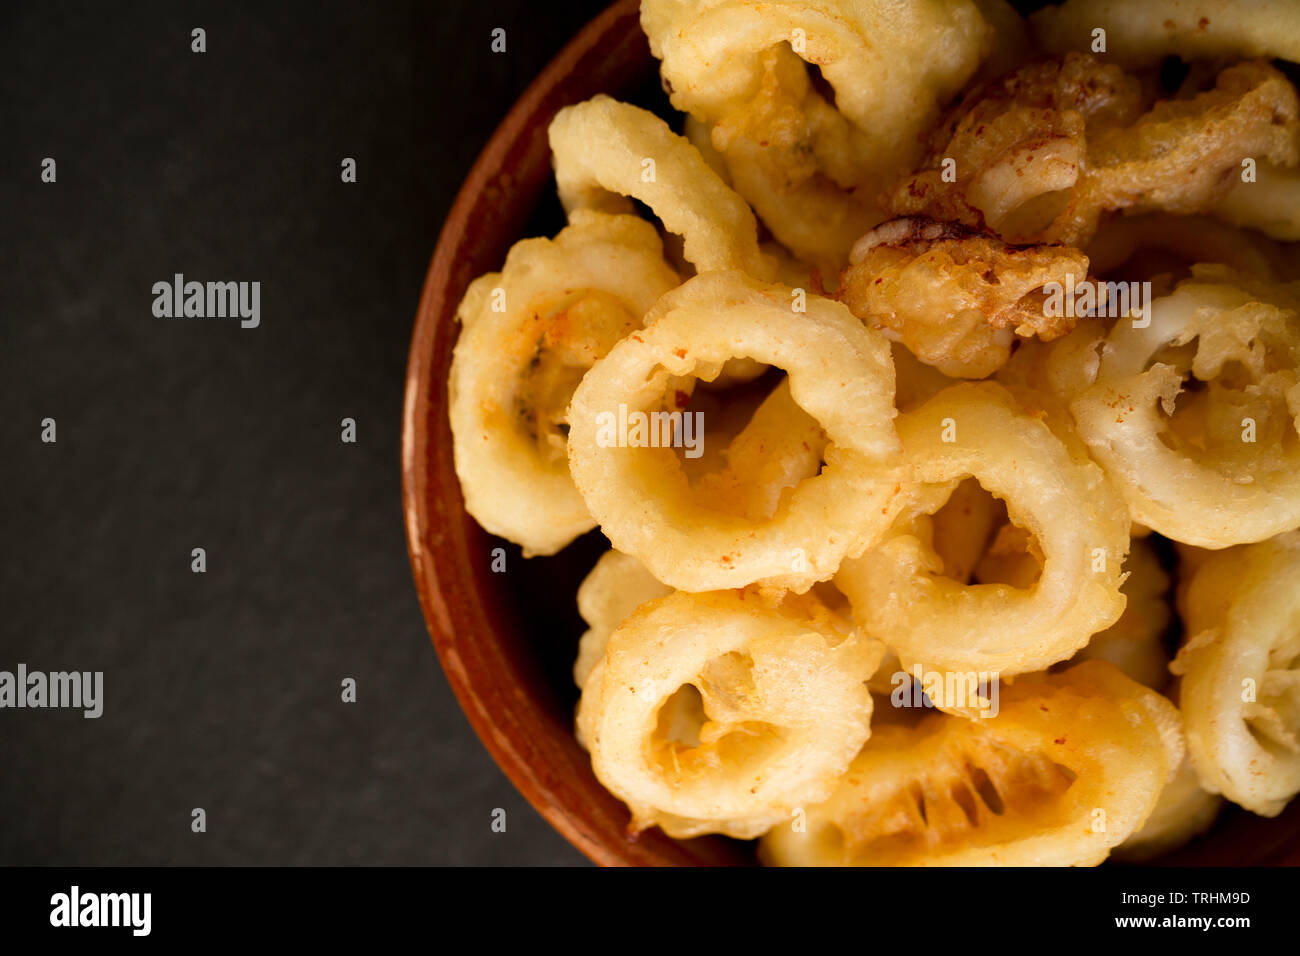 Deep fried, battered squid rings and tentacles from a Loligo vulgaris squid that was caught on rod and line in the English Channel. Dorset England UK Stock Photo